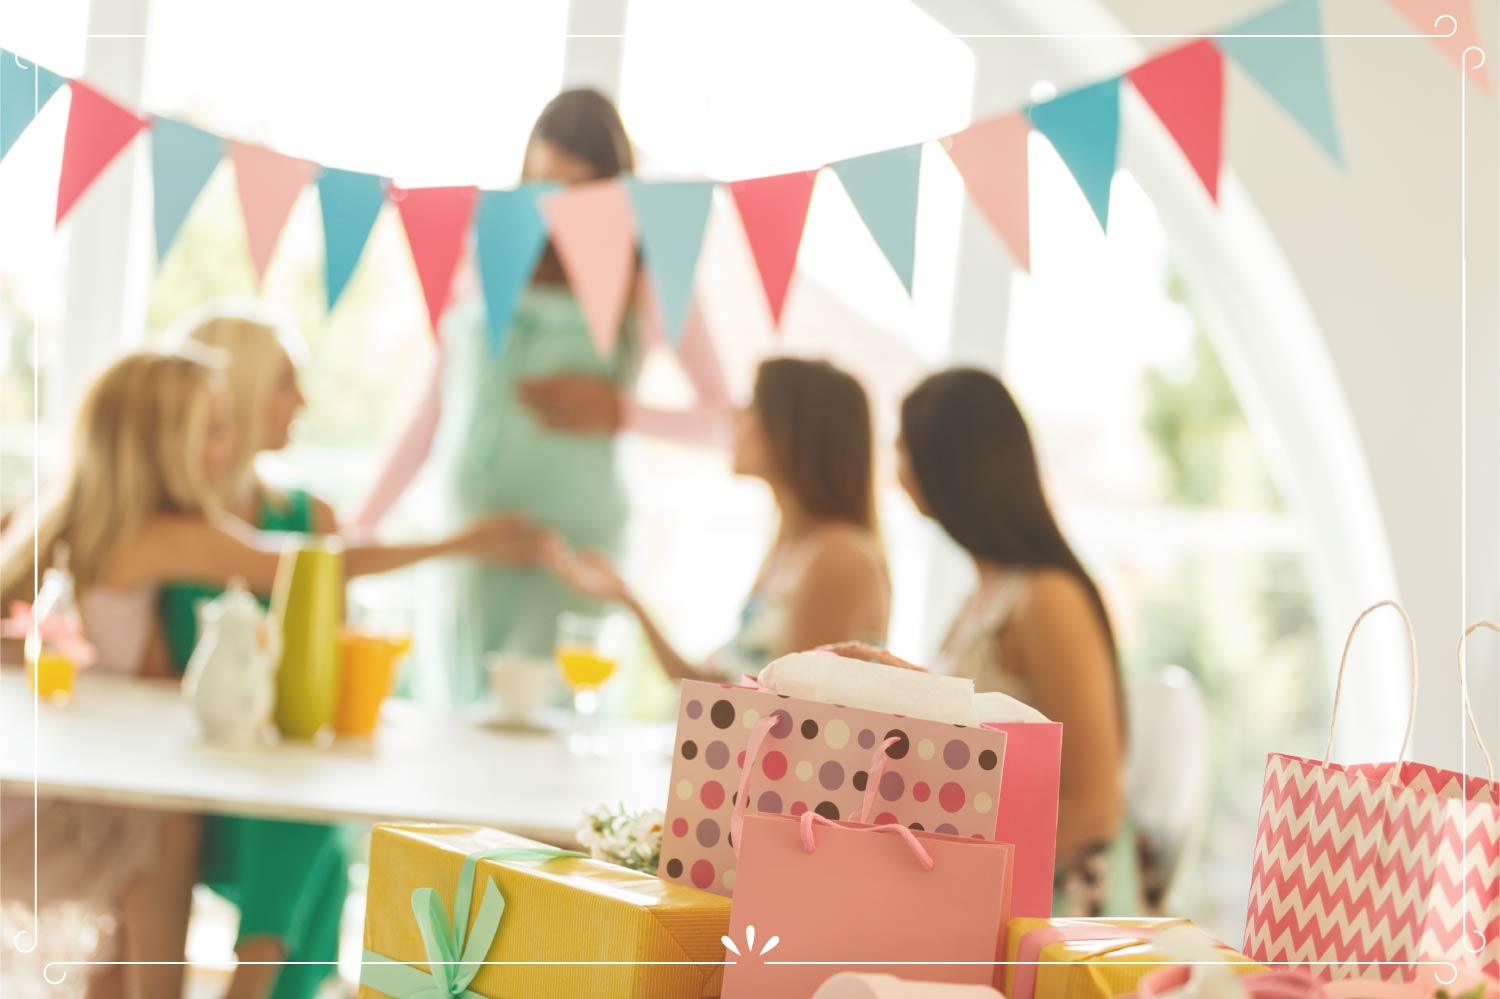 Who-should-be-invited-to-a-gender-reveal-party